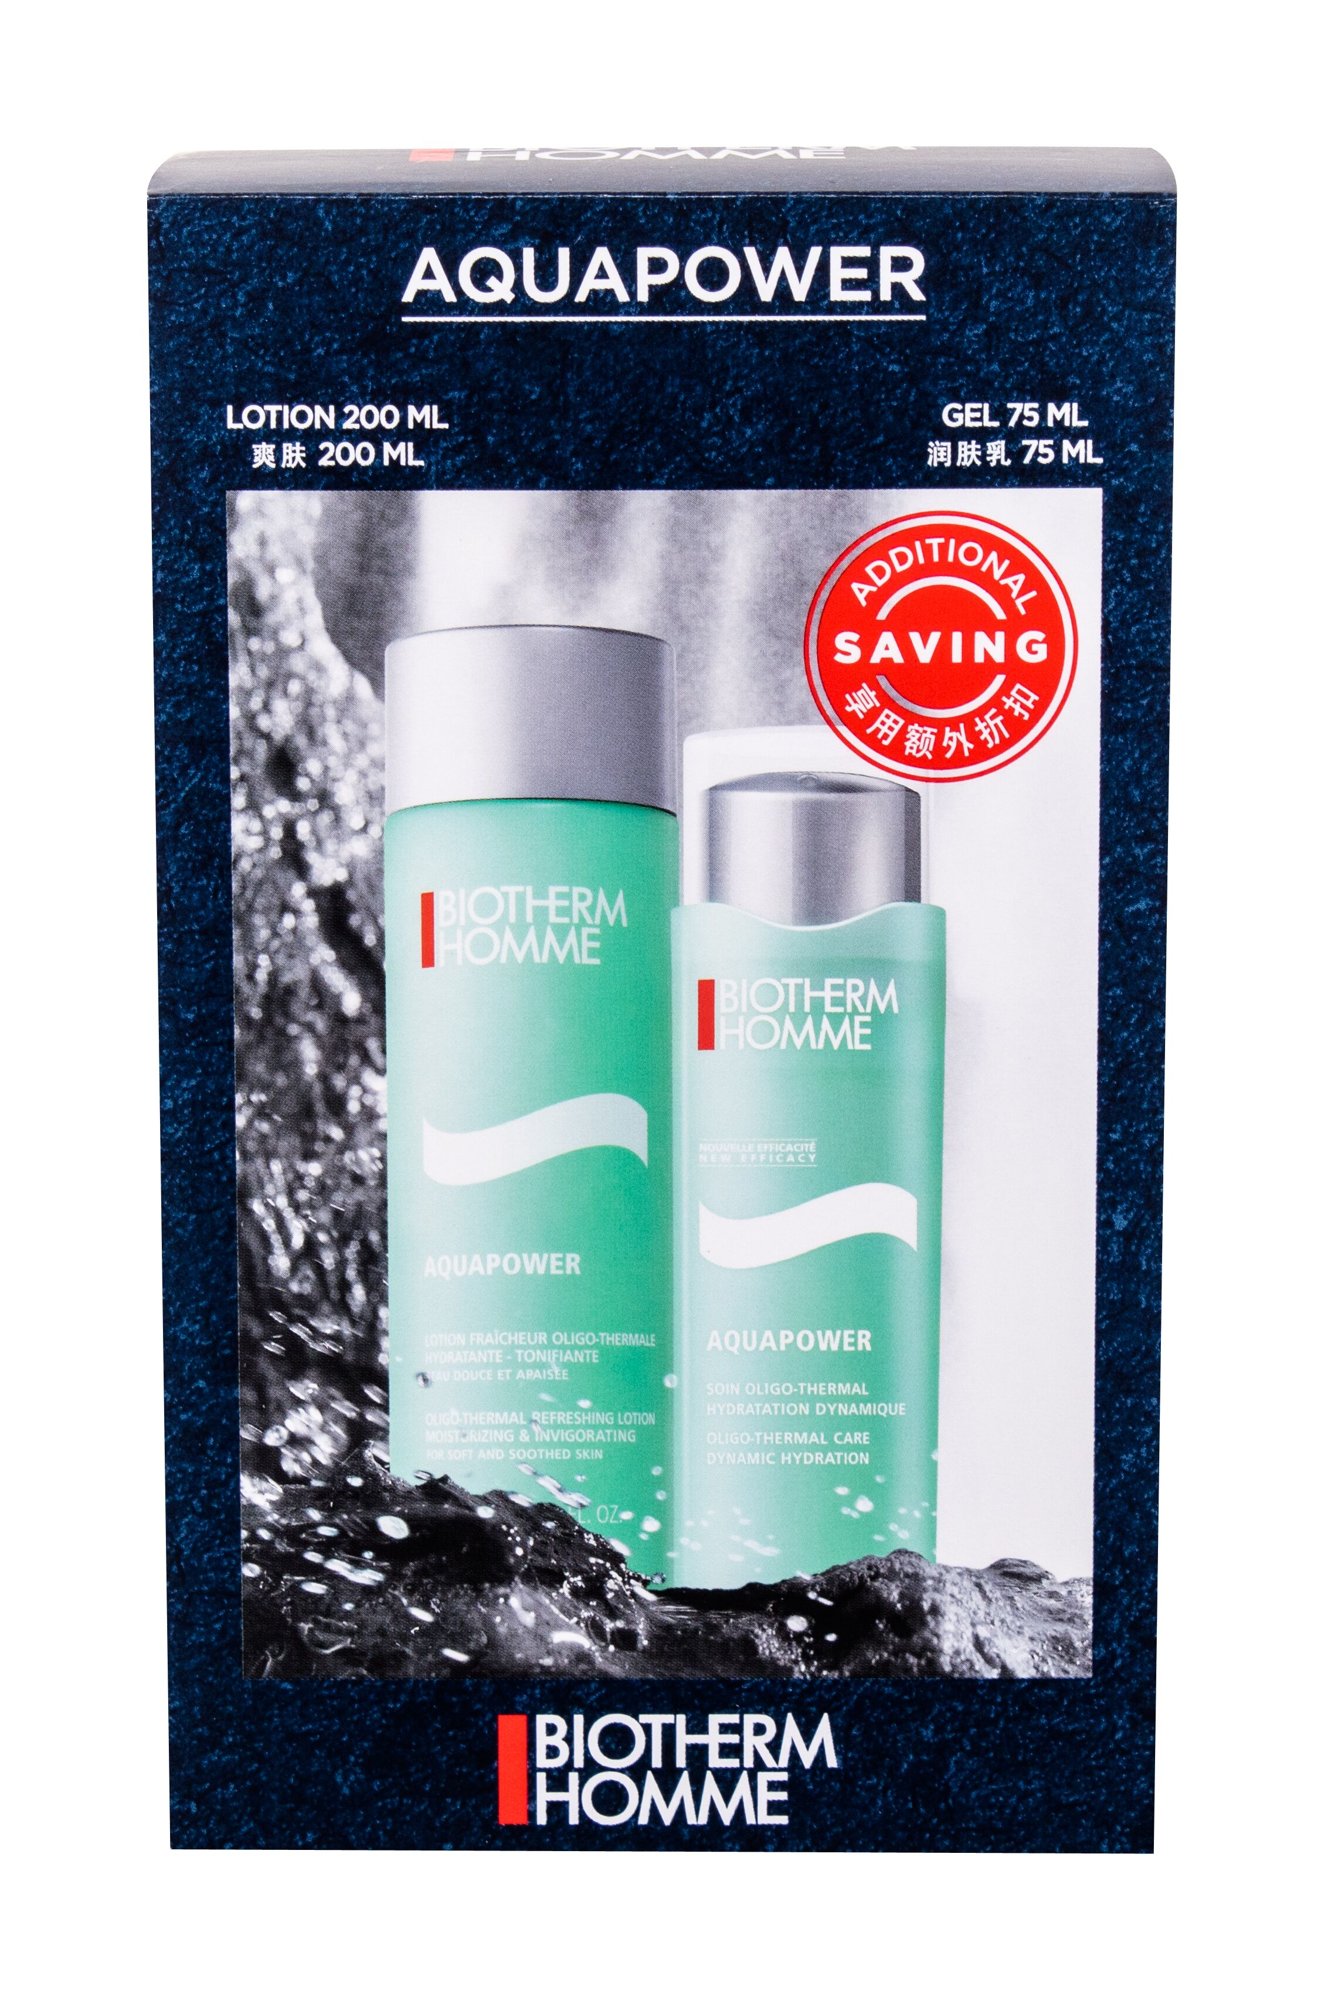 Biotherm Homme Aquapower 200ml After Shave Aquapower Oligo-Thermal Refreshing Lotion 200 ml + Facial Gel Aquapower Oligo-Thermal Care 75 ml vanduo po skutimosi Rinkinys